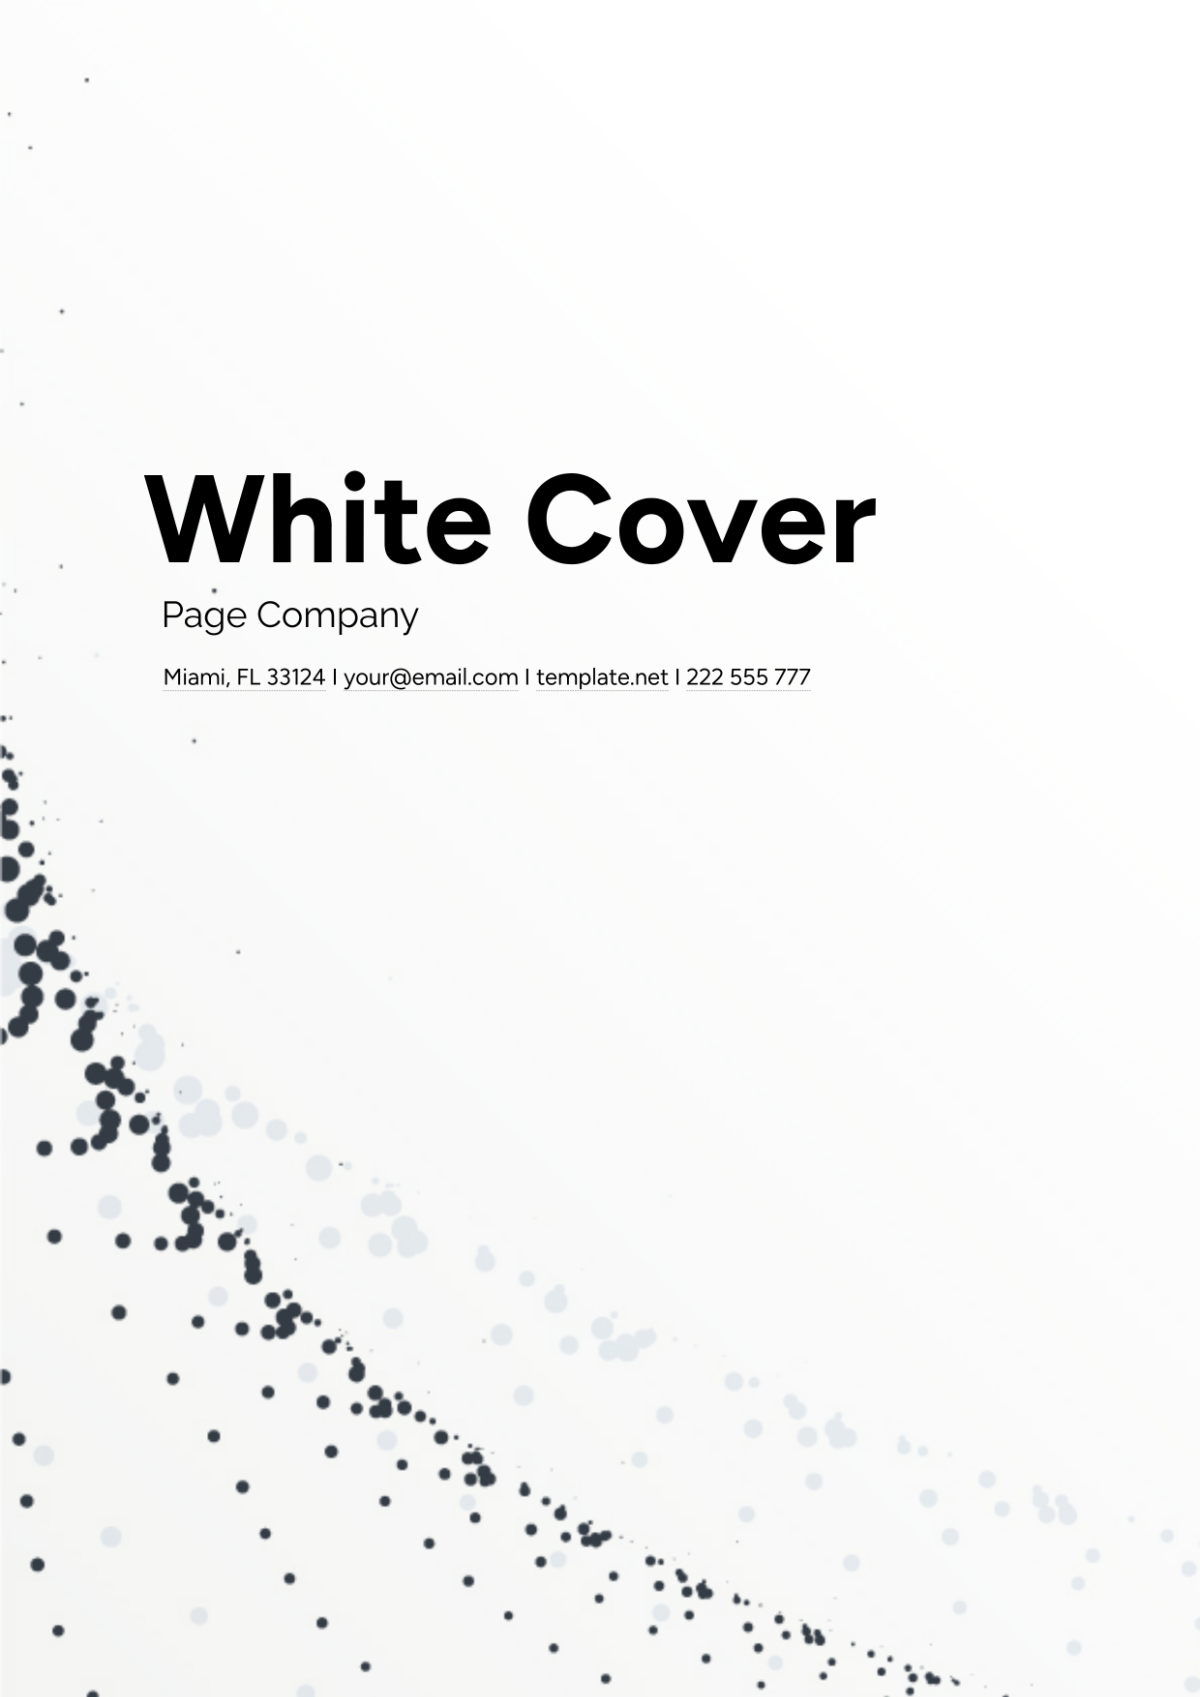 White Cover Page Company Template